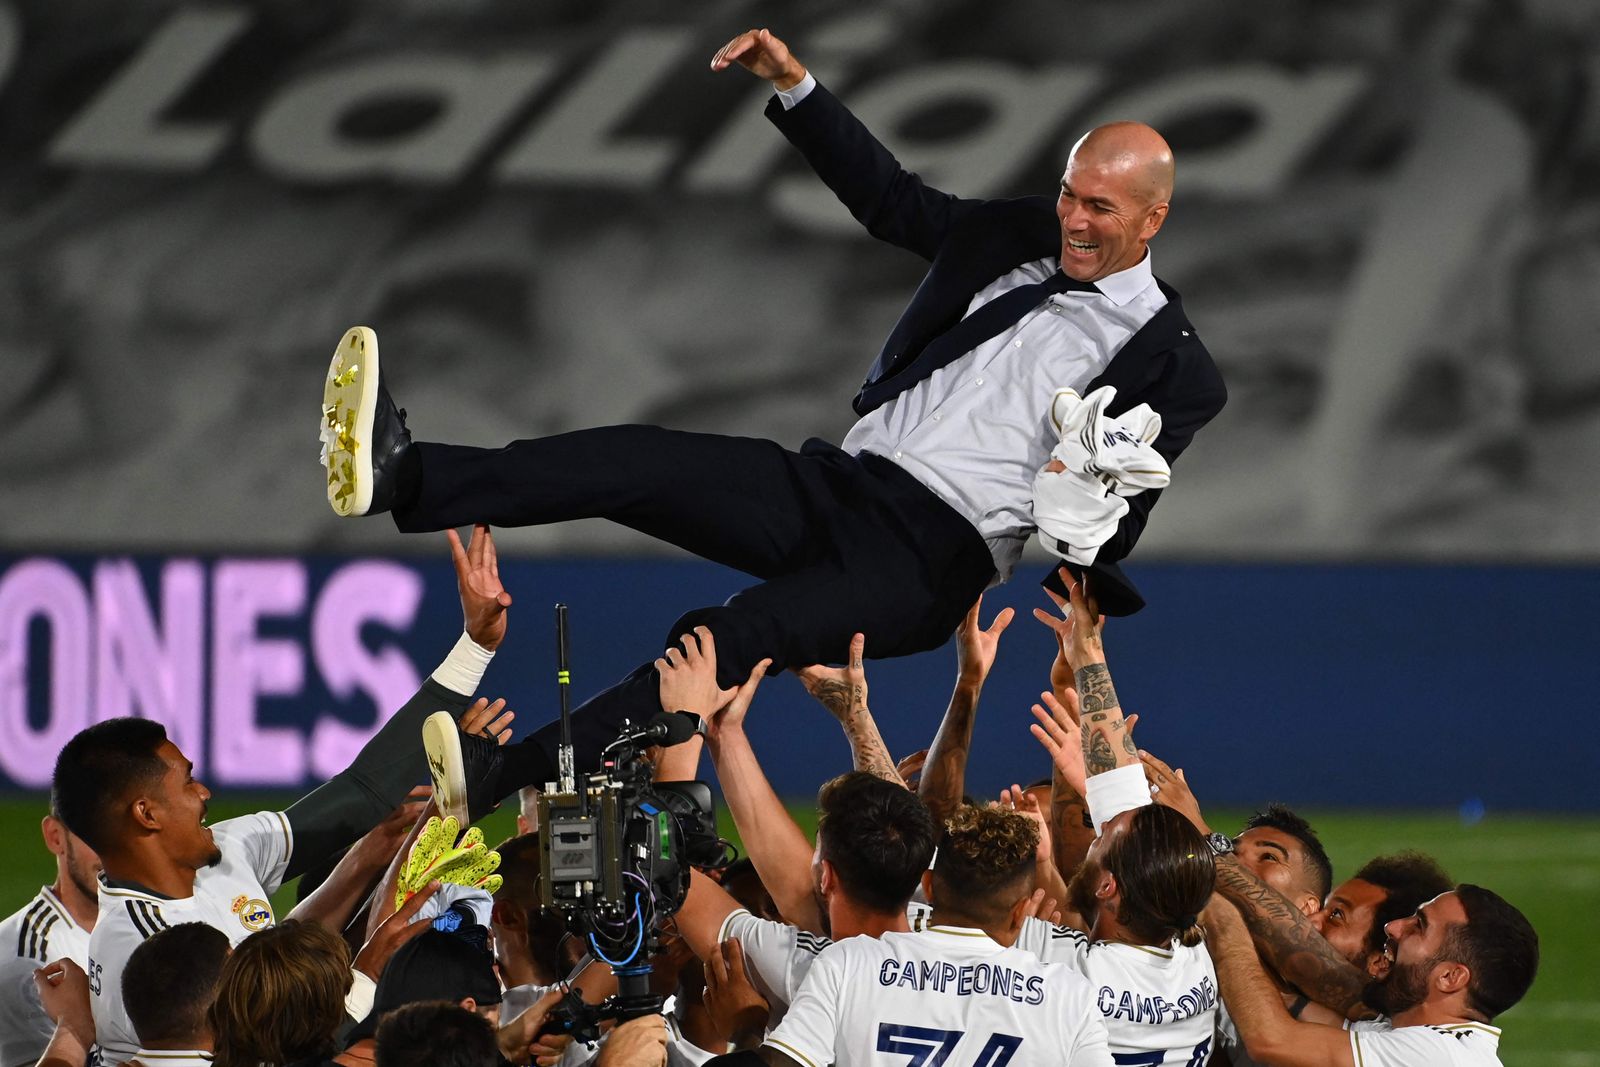 (FILES) In this file photo taken on July 16, 2020 Real Madrid's player toss Real Madrid's French coach Zinedine Zidane after winning the Liga title after the Spanish League football match between Real Madrid CF and Villarreal CF at the Alfredo di Stefano stadium in Valdebebas, on the outskirts of Madrid. - Zinedine Zidane resigned as Real Madrid manager because he felt the Spanish club no longer had any faith in him, he wrote in an open letter on May 31, 2021. (Photo by GABRIEL BOUYS / AFP) - AFP